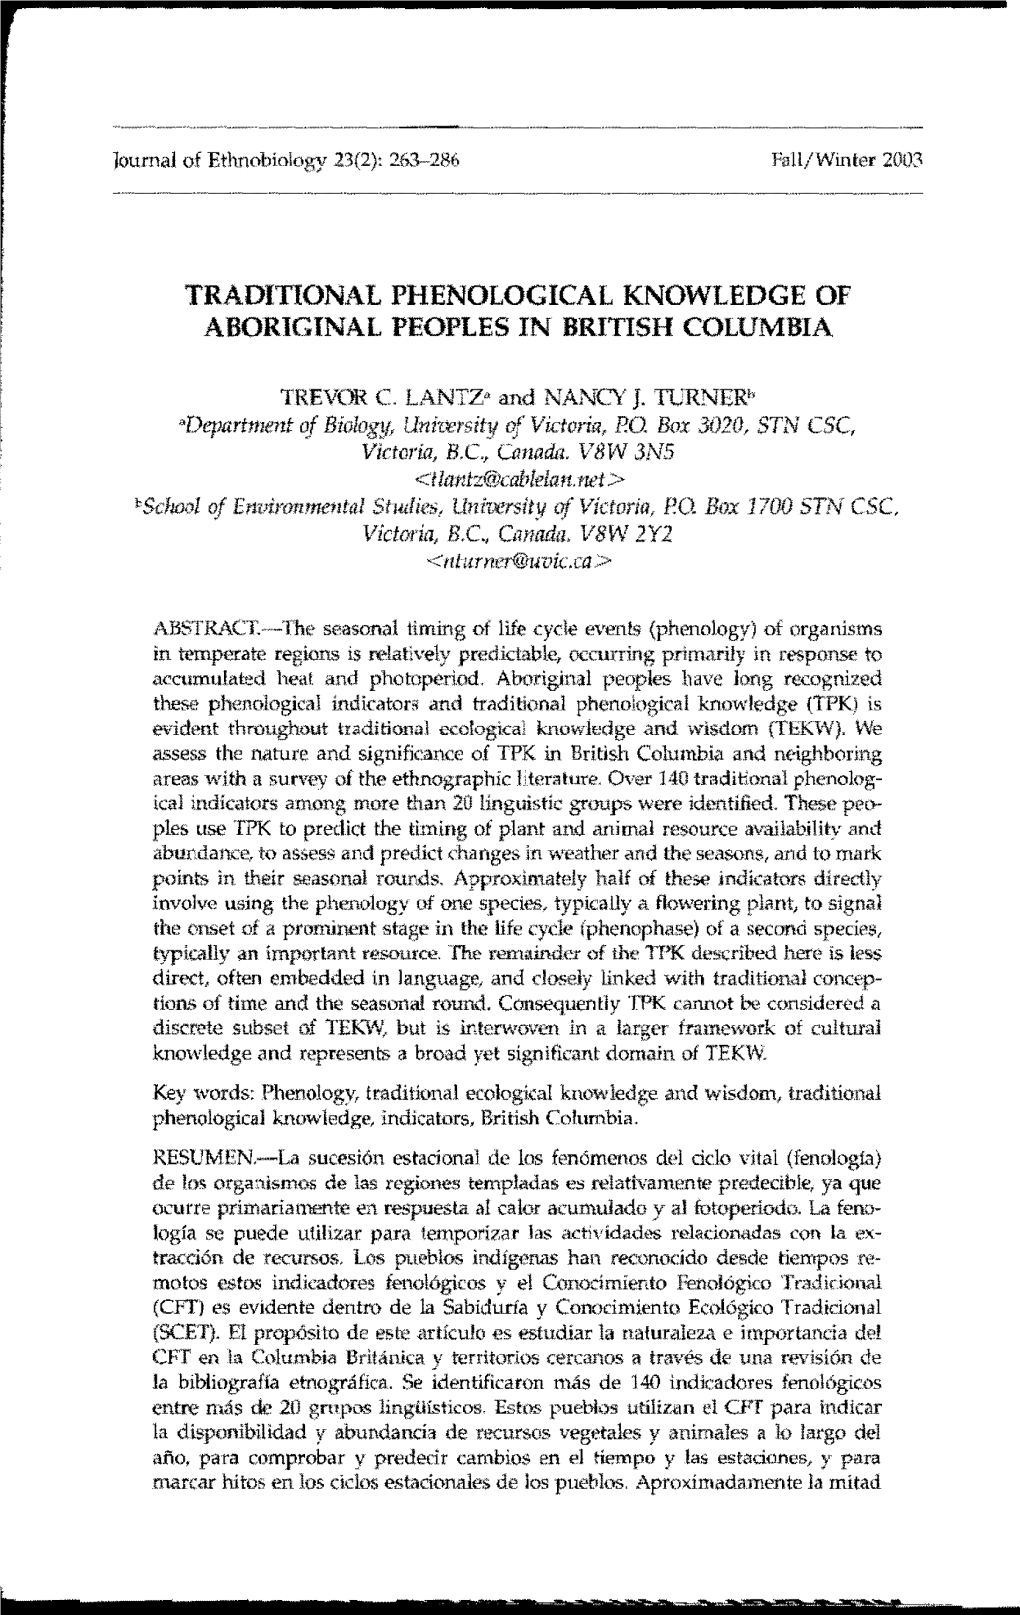 Traditional Phenological Knowledge of Aboriginal Peoples in British Columbia